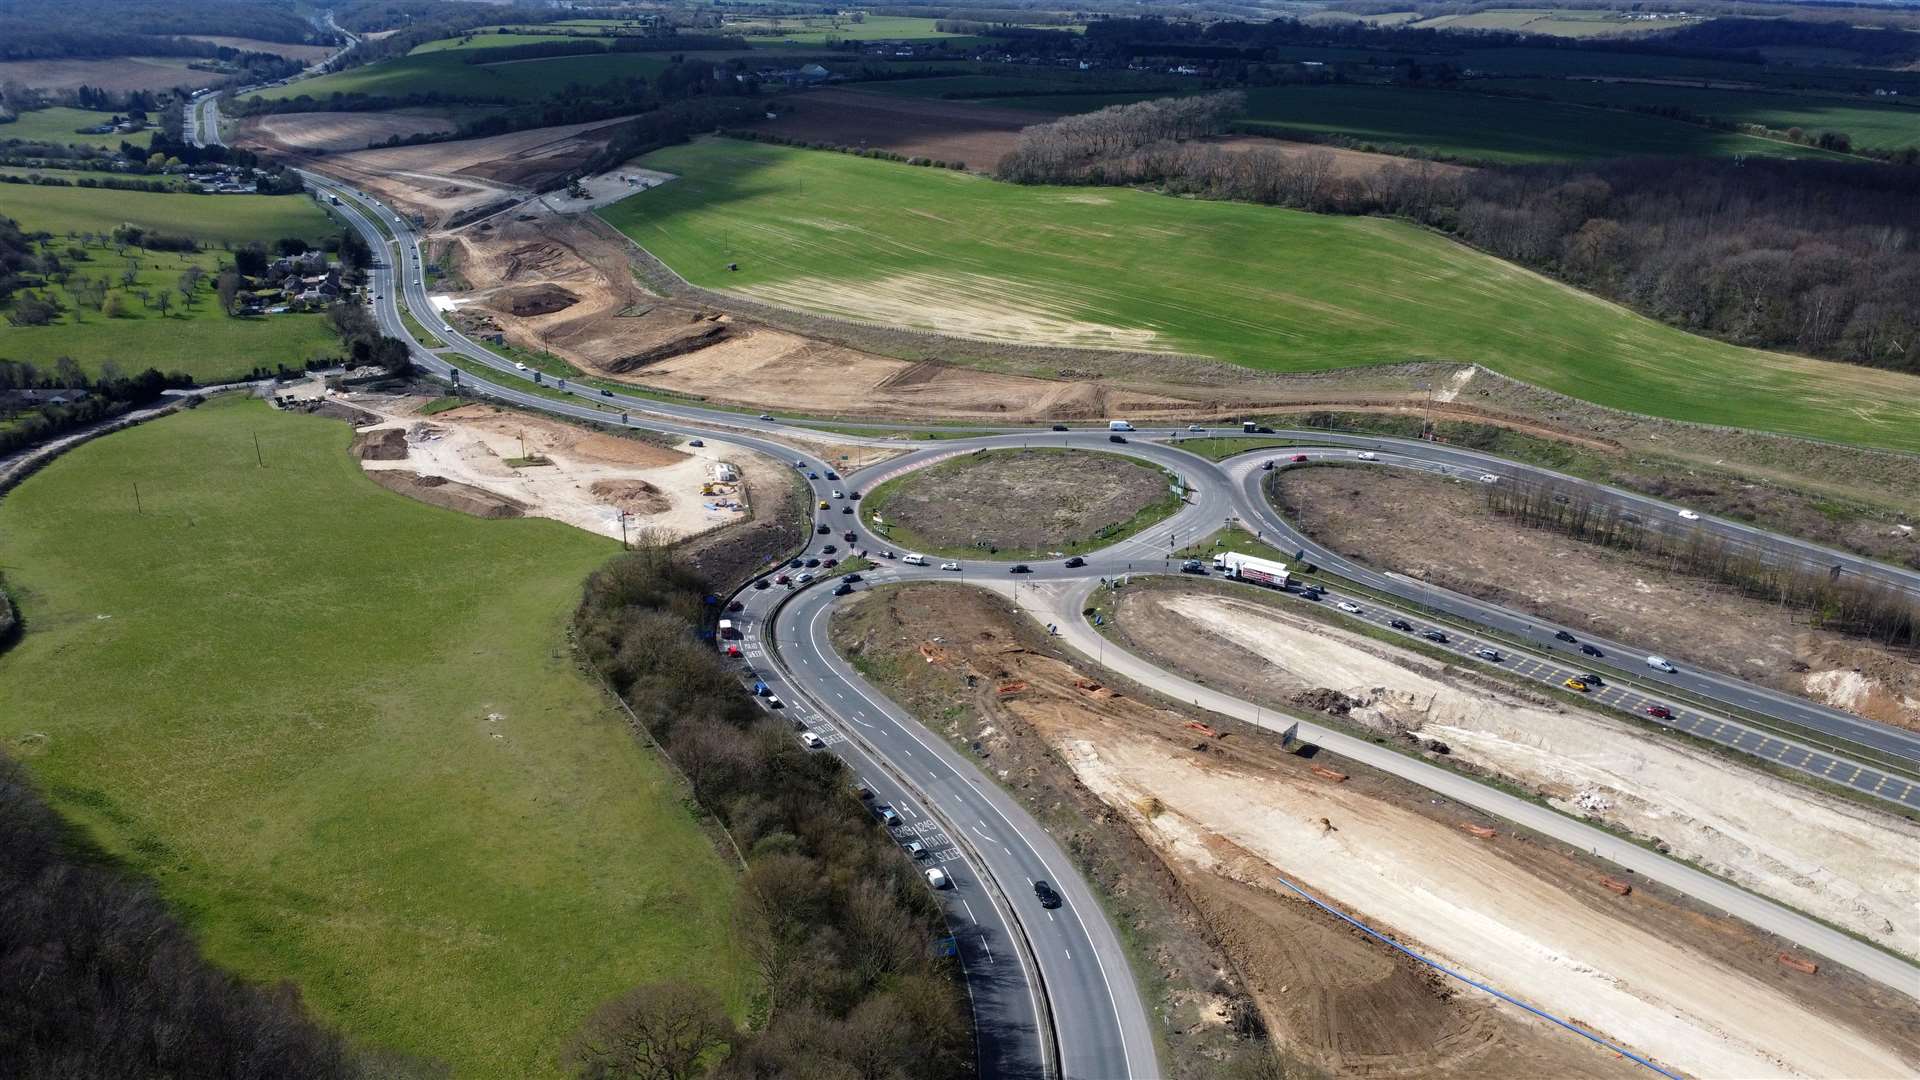 Aerial view of work on Stockbury roundabout at Sittingbourne. Maidstone is to the left. Picture: Barry Goodwin